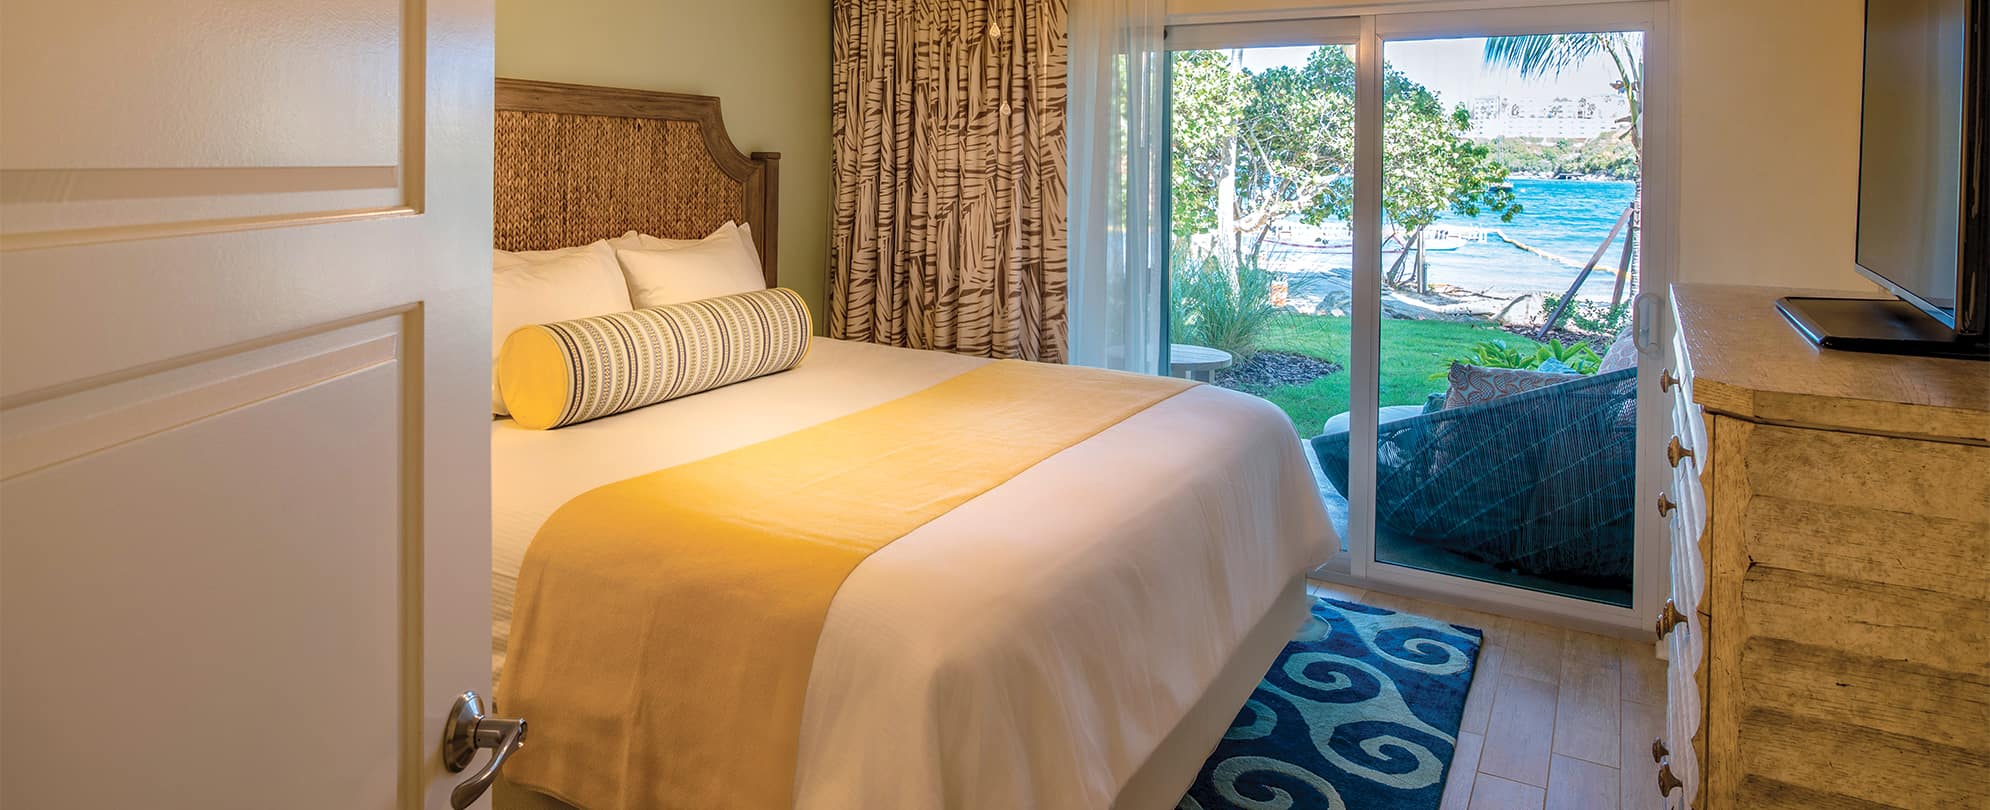 First floor Presidential Reserve bedroom with king bed and ocean view at Margaritaville Vacation Club by Wyndham - St. Thomas.